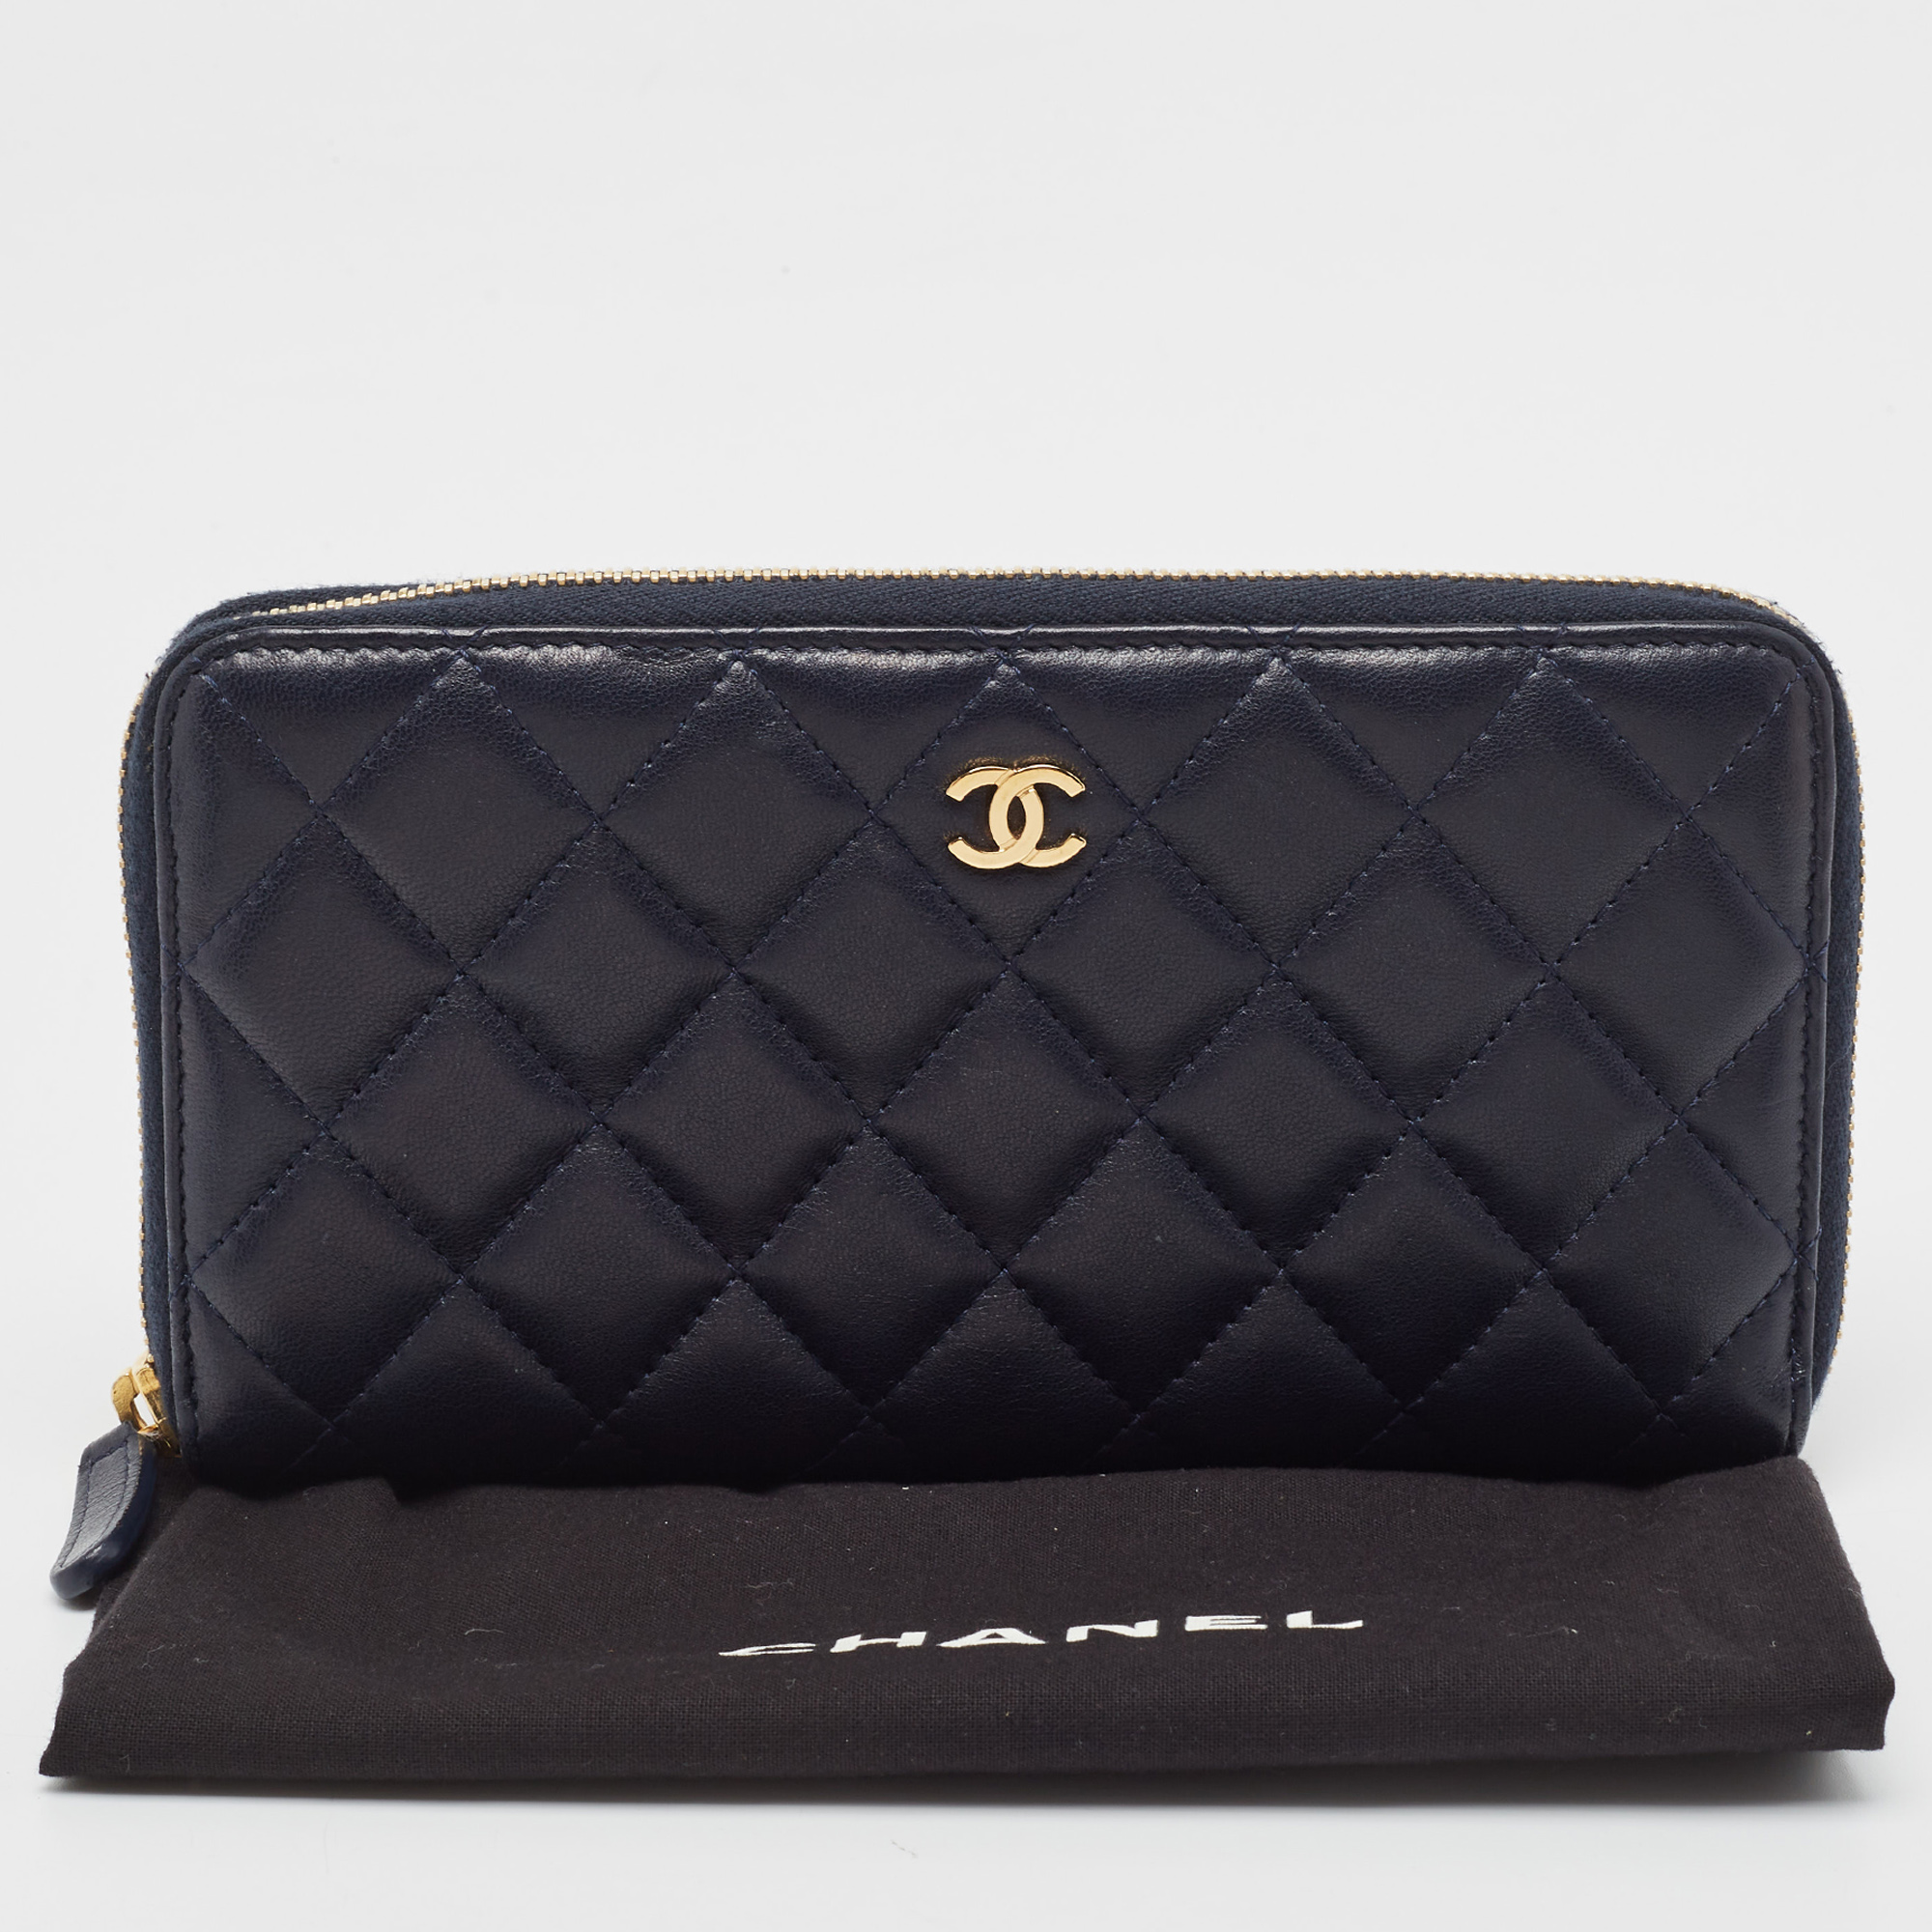 Chanel Navy Blue Quilted Leather CC Zip Around Wallet